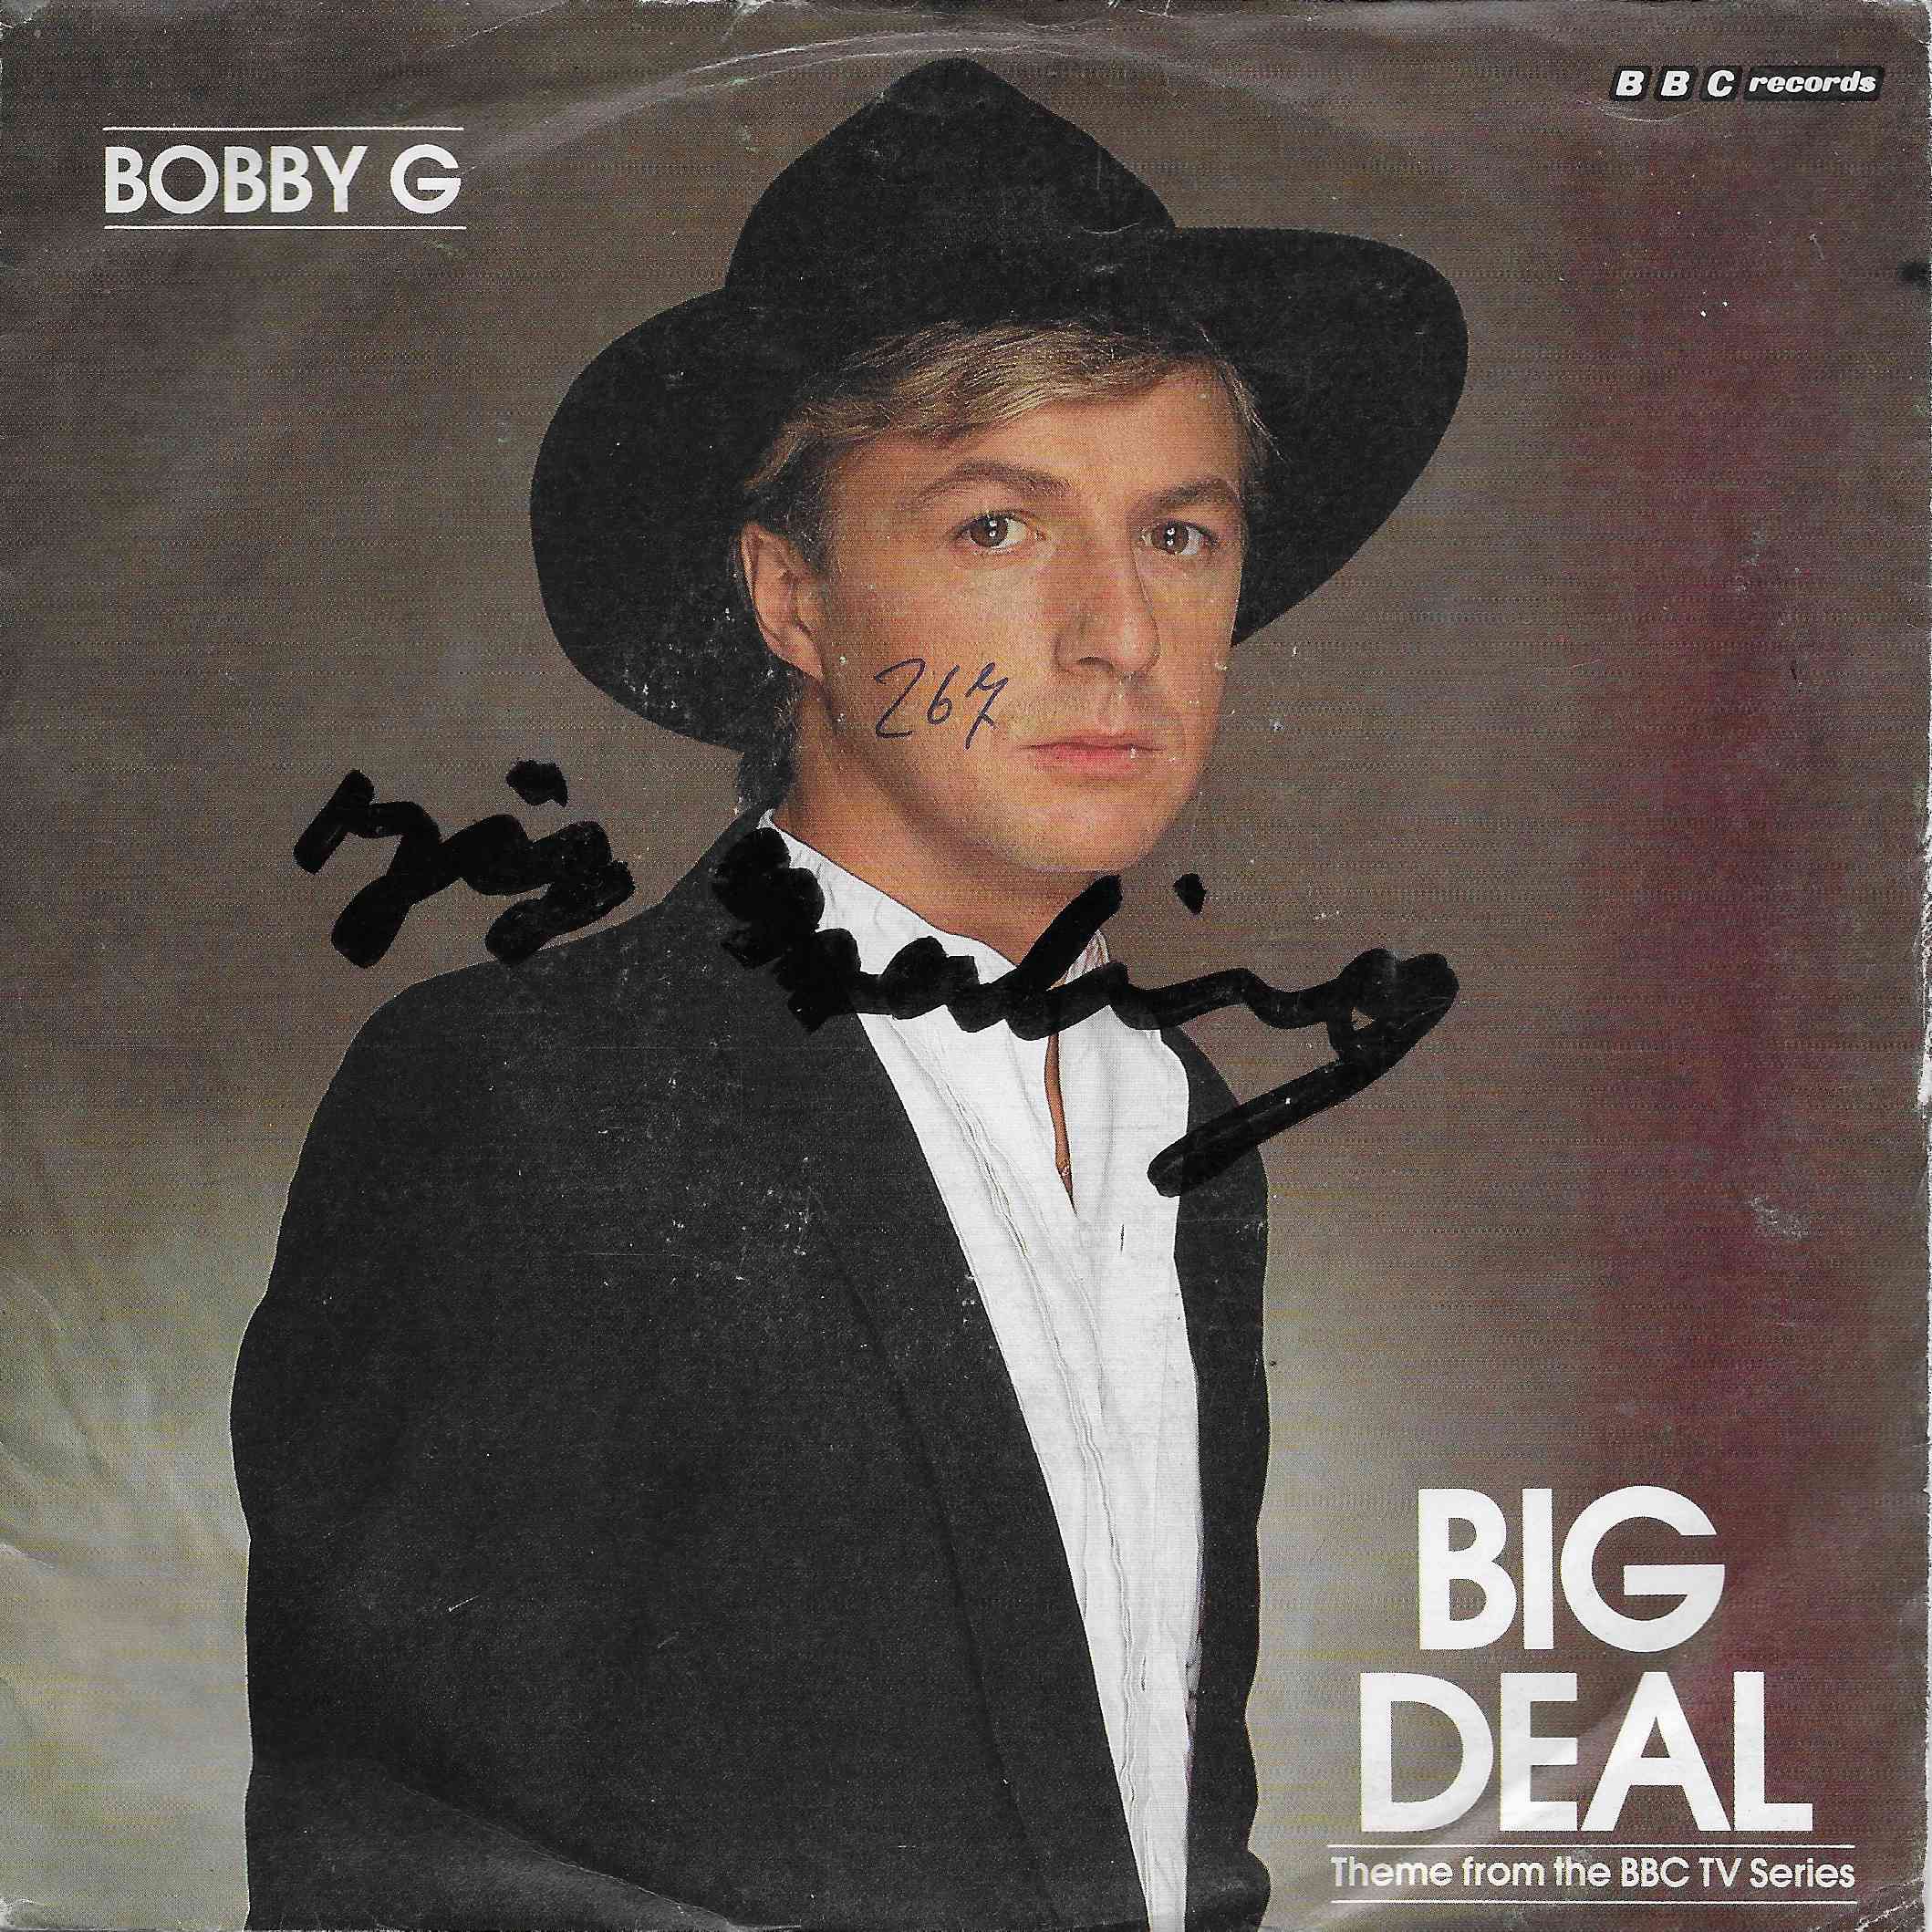 Picture of INT 113.009 Big Deal (German import) by artist Bobby G from the BBC records and Tapes library